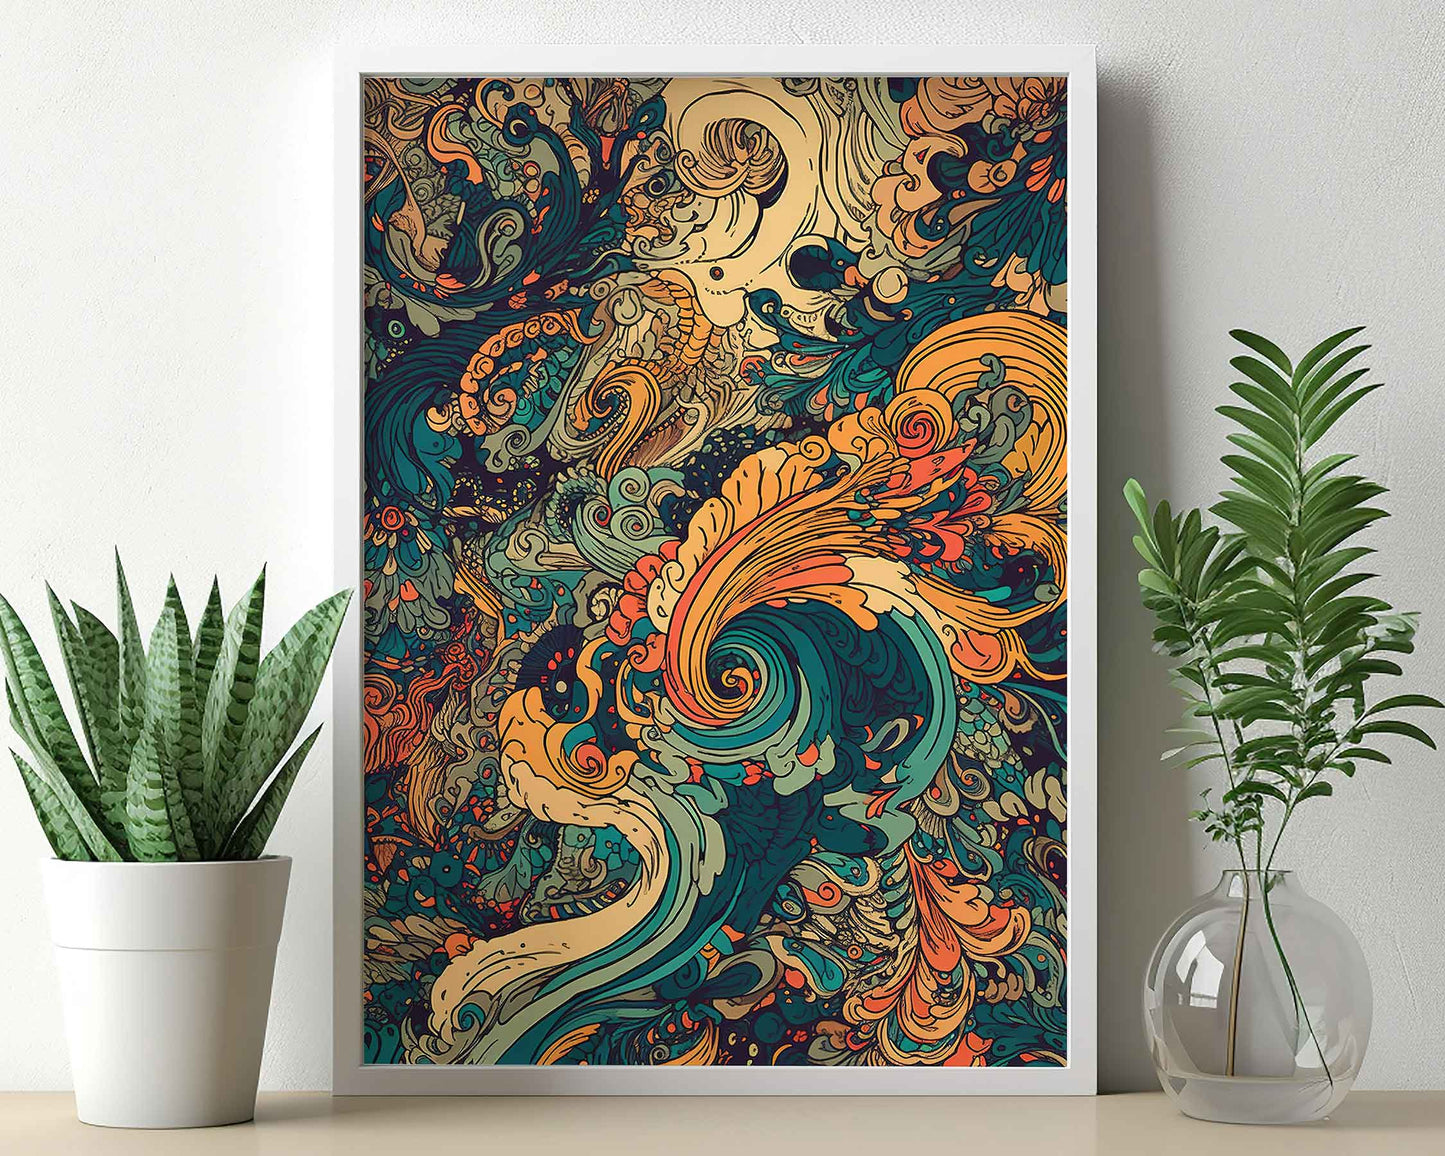 Framed Image of Art Nouveau Parisian Vintage 70s Psychedelic Wall Art Poster Print